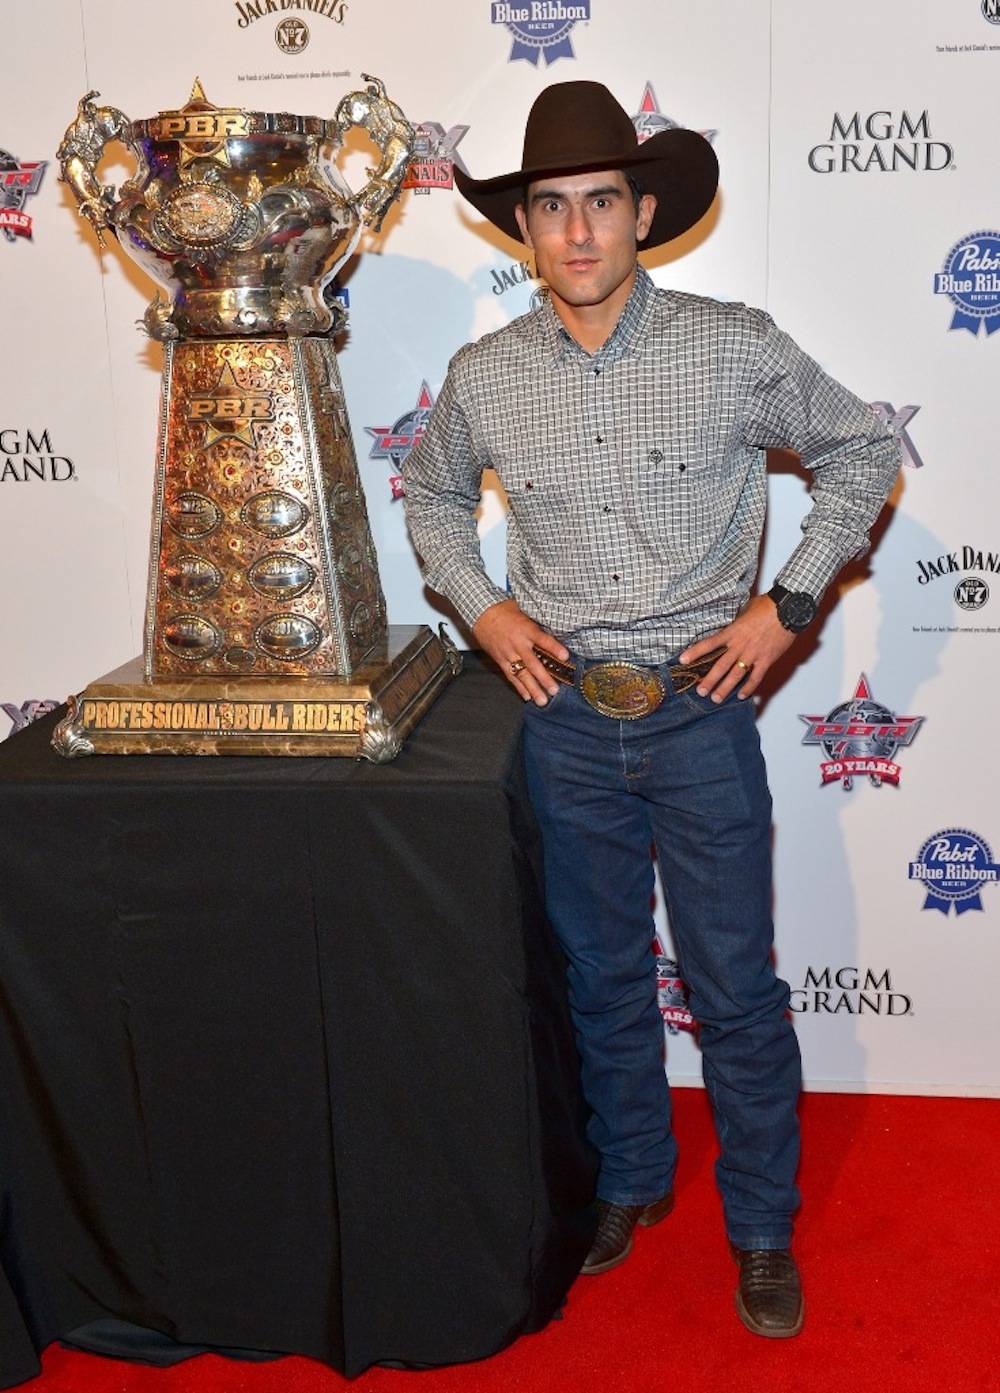 Photos PBR World Finals Champions Arrive at the MGM Grand